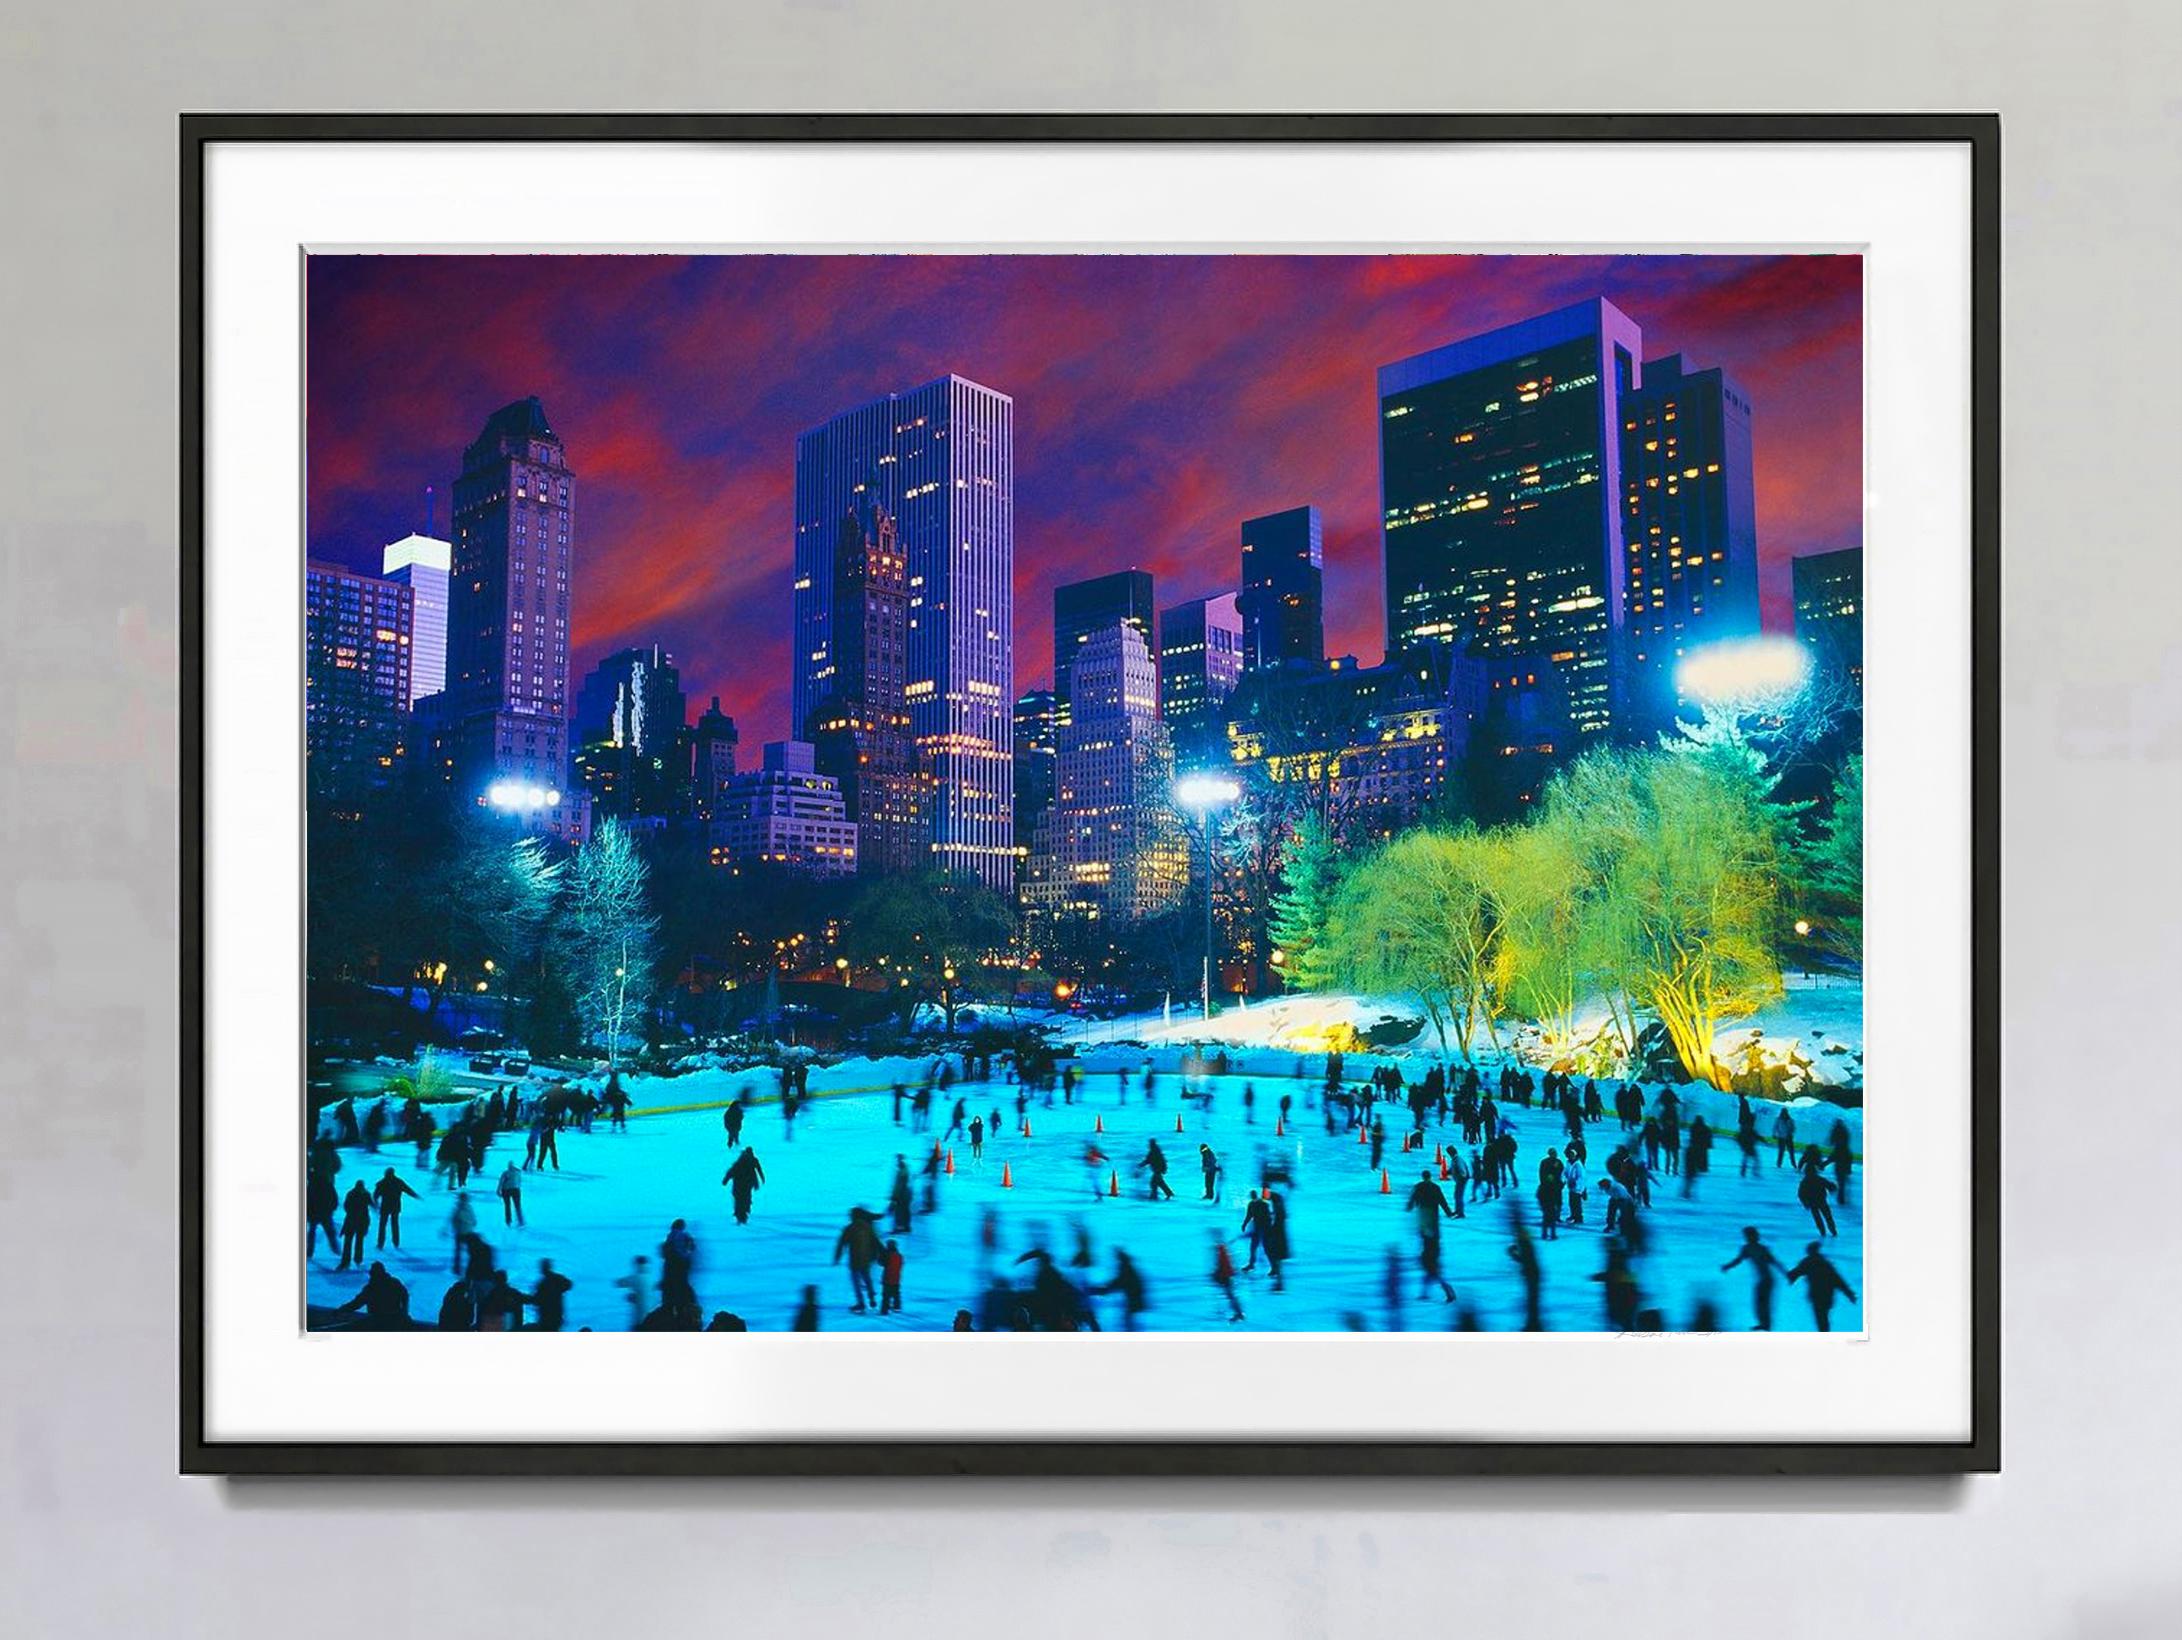  Central Park Ice Skaters at Night  Purple Sky in  New York City - Photograph by Mitchell Funk